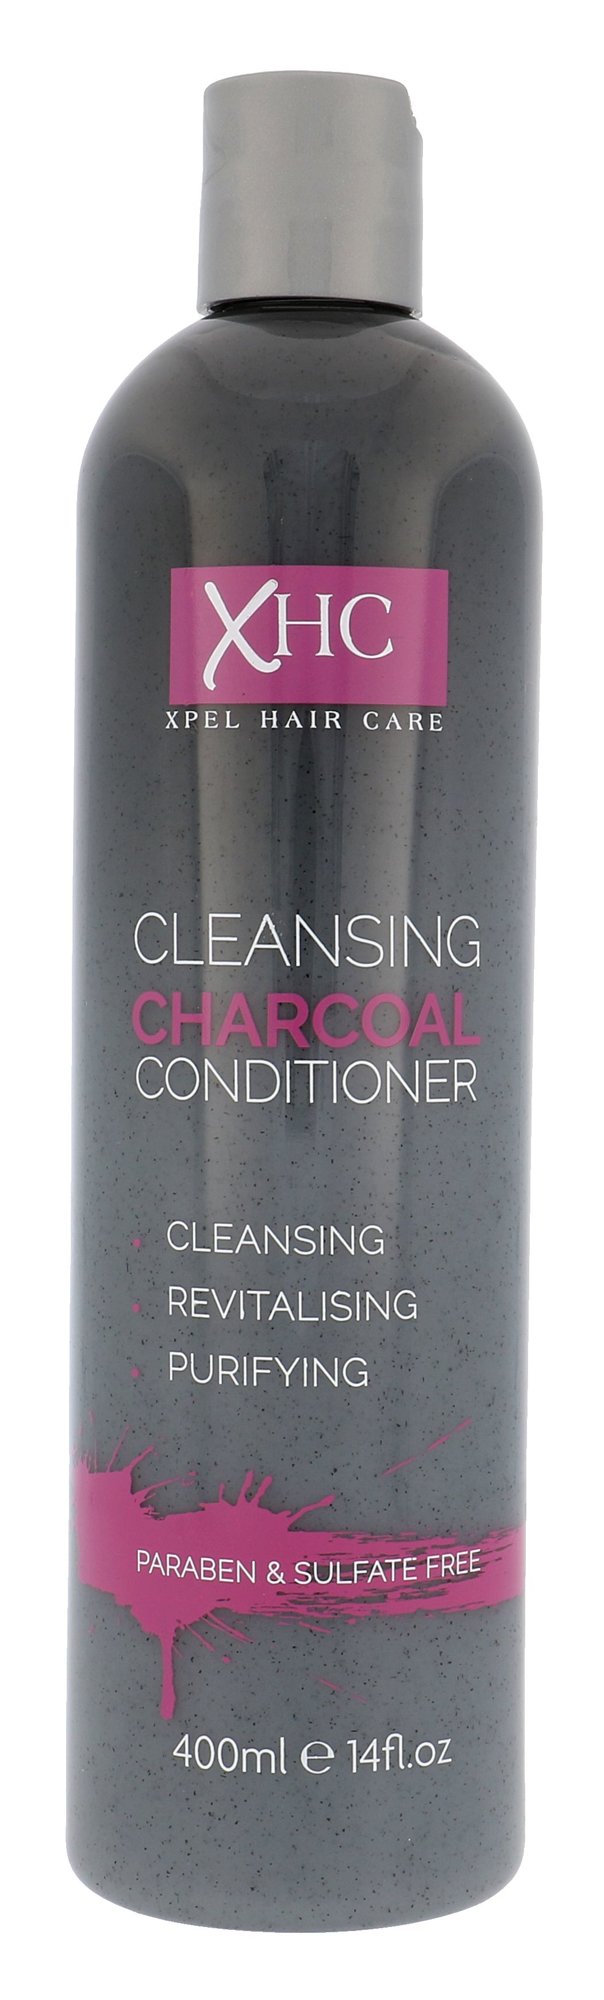 Xpel Cleansing Charcoal Conditioner